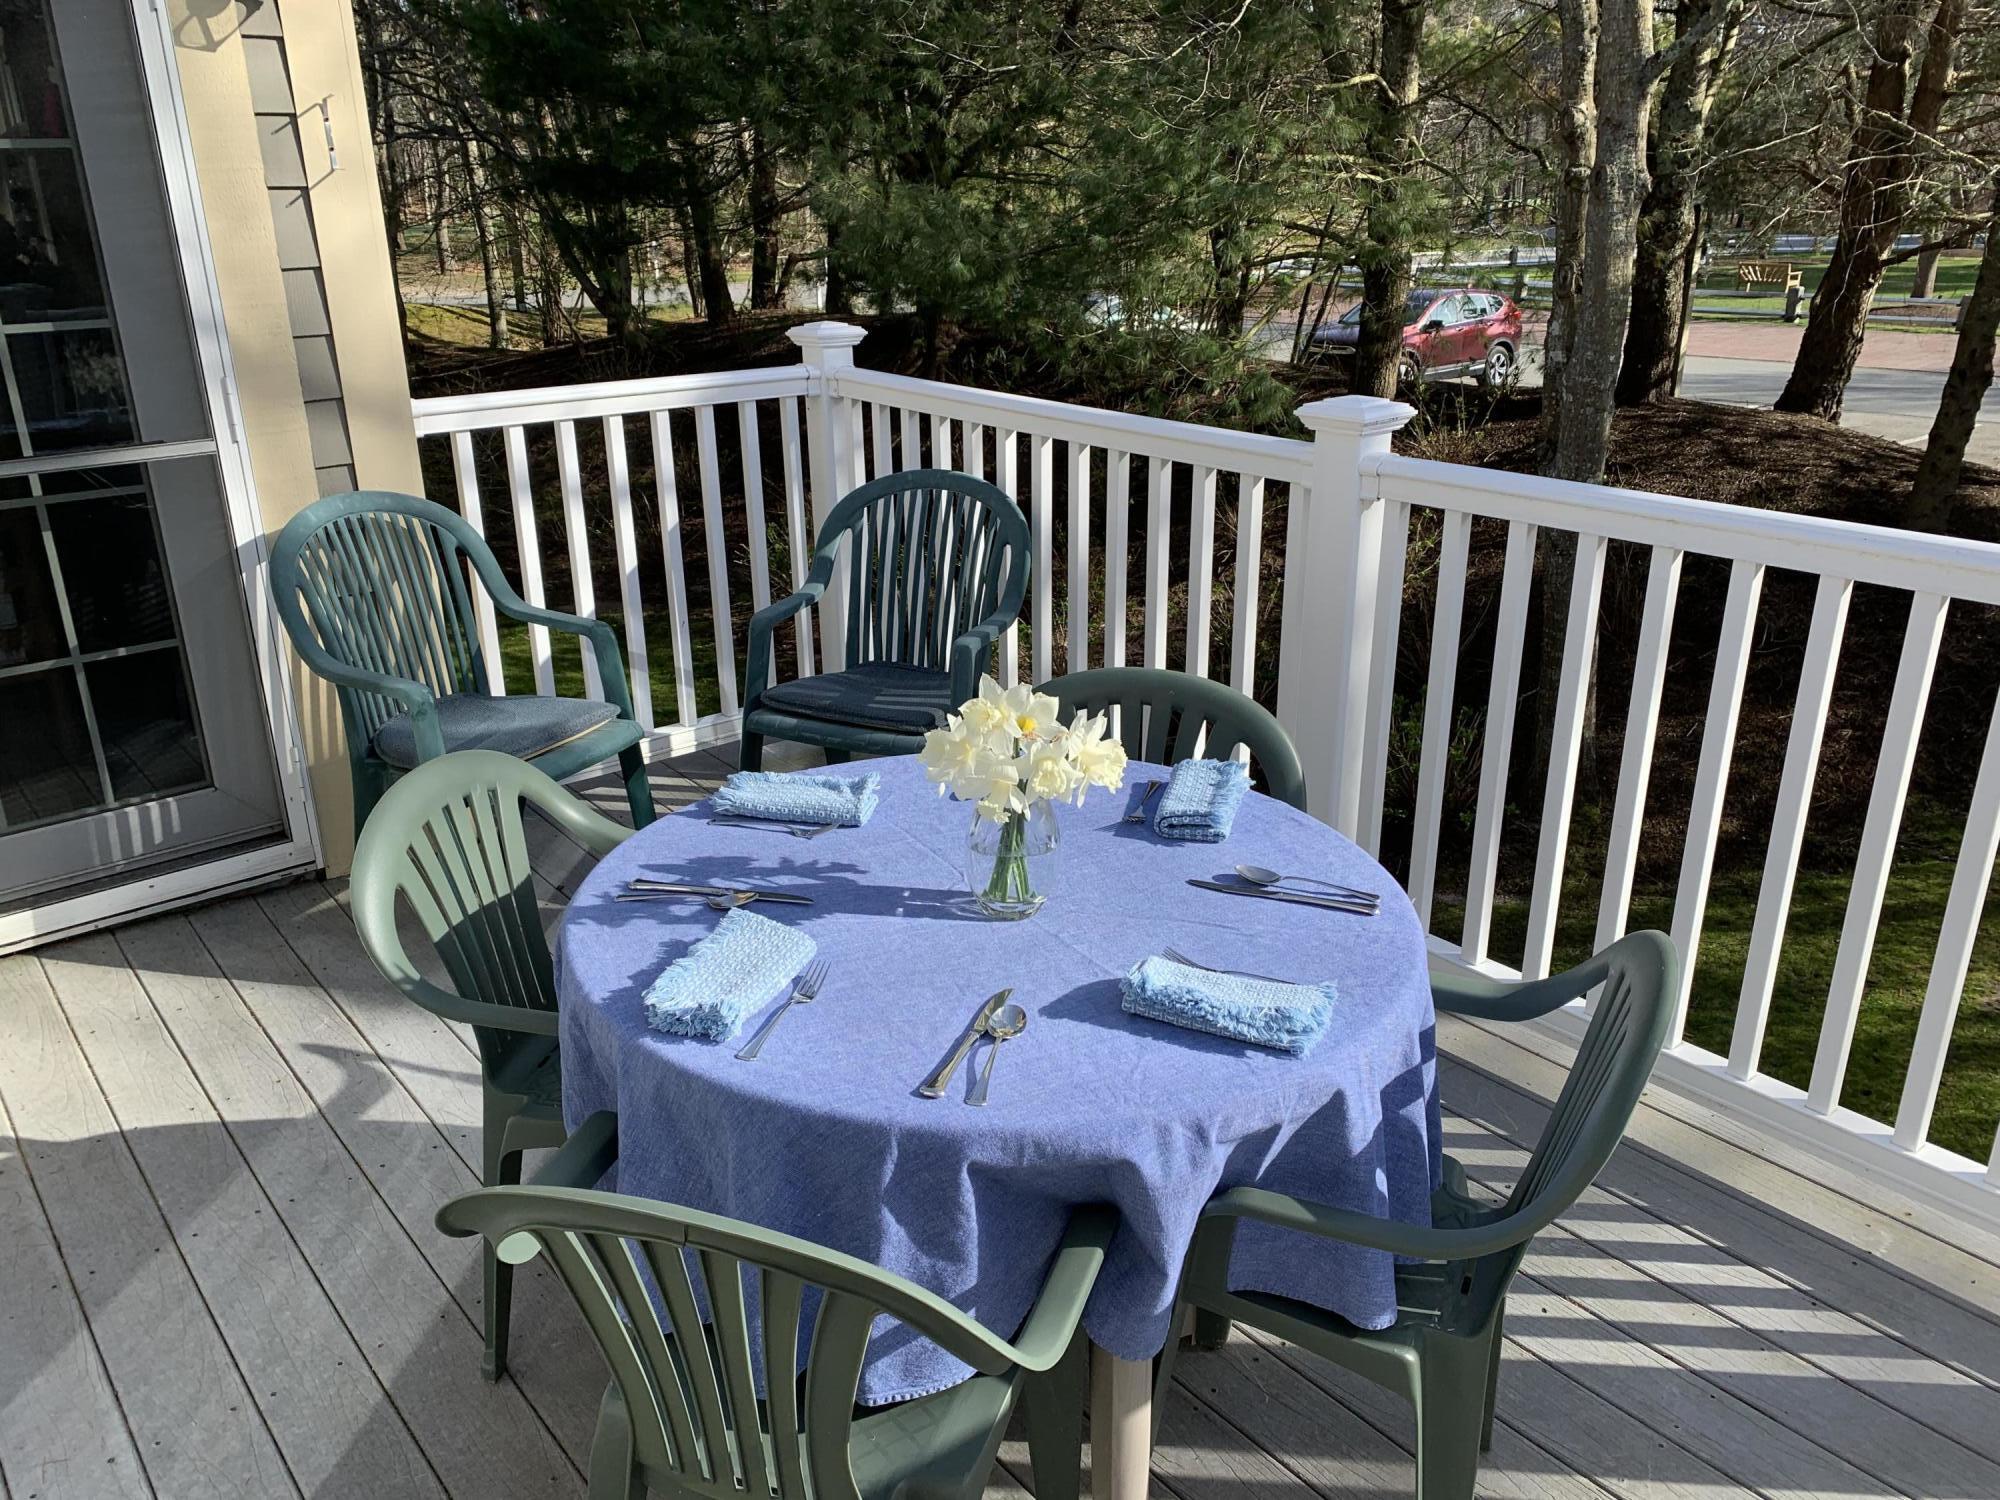 a view of a chairs and table in the patio